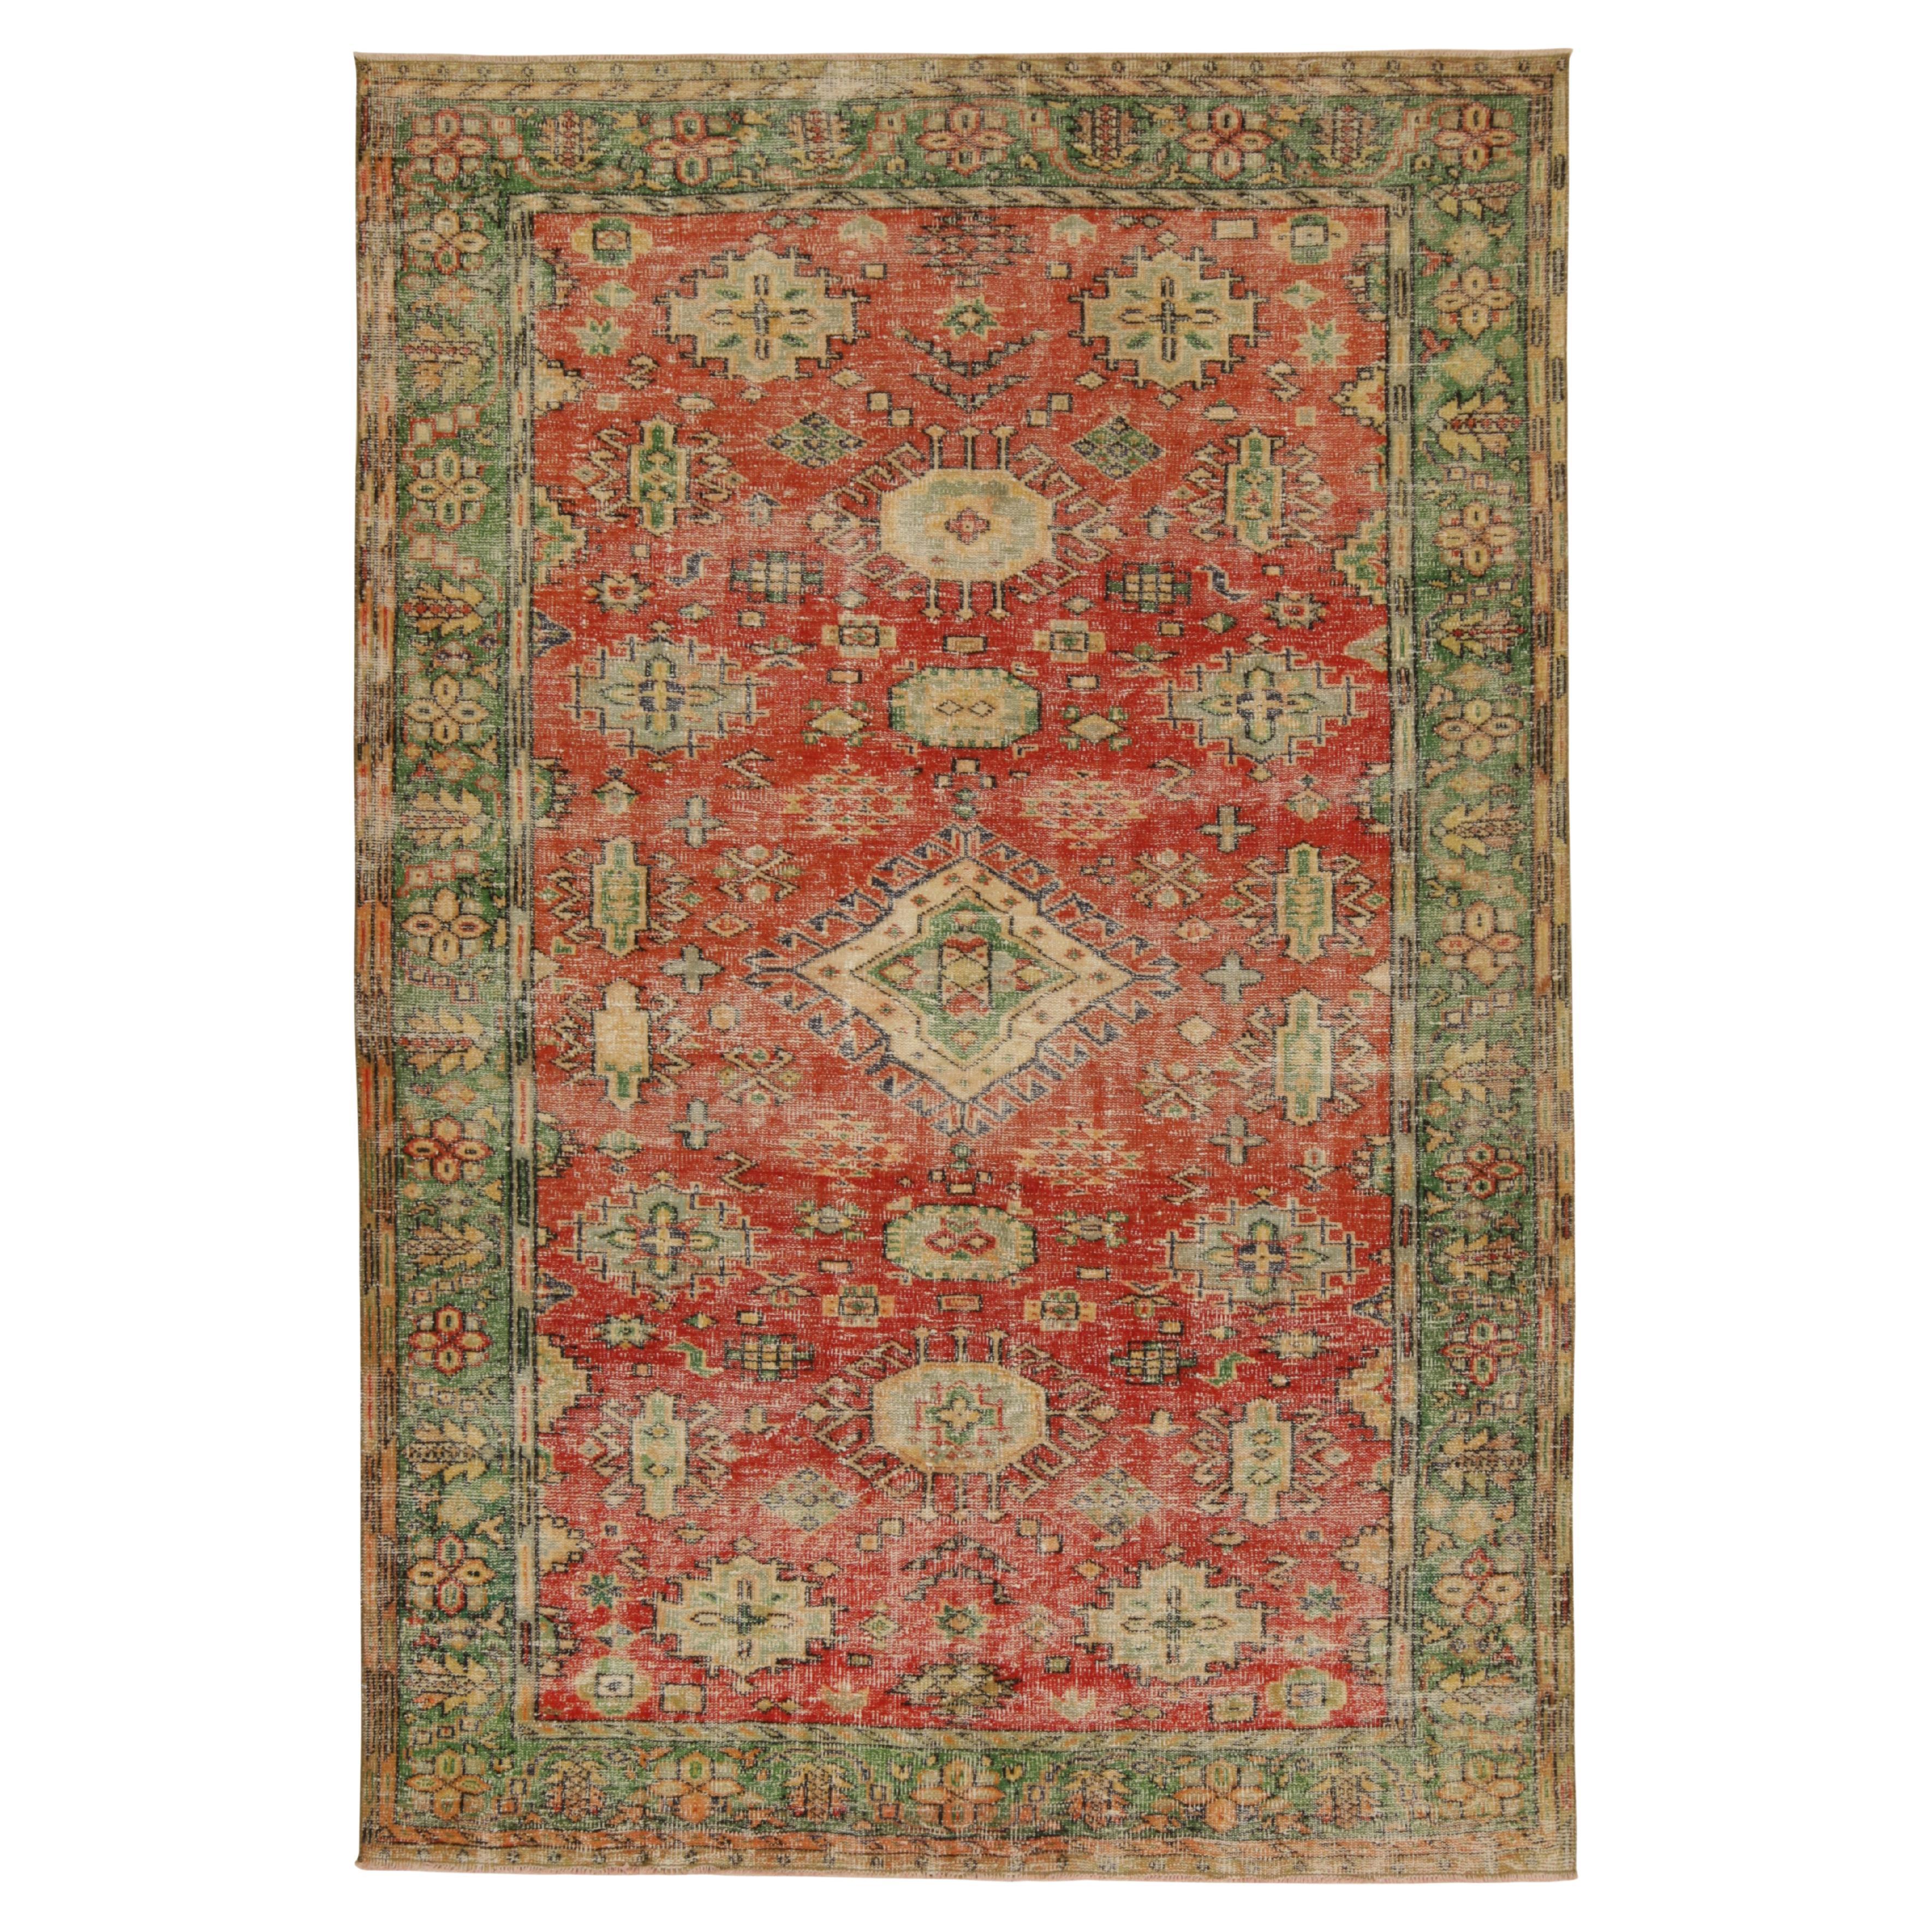 Vintage Distressed Rug in Red with Green and Beige Medallions, by Rug & Kilim